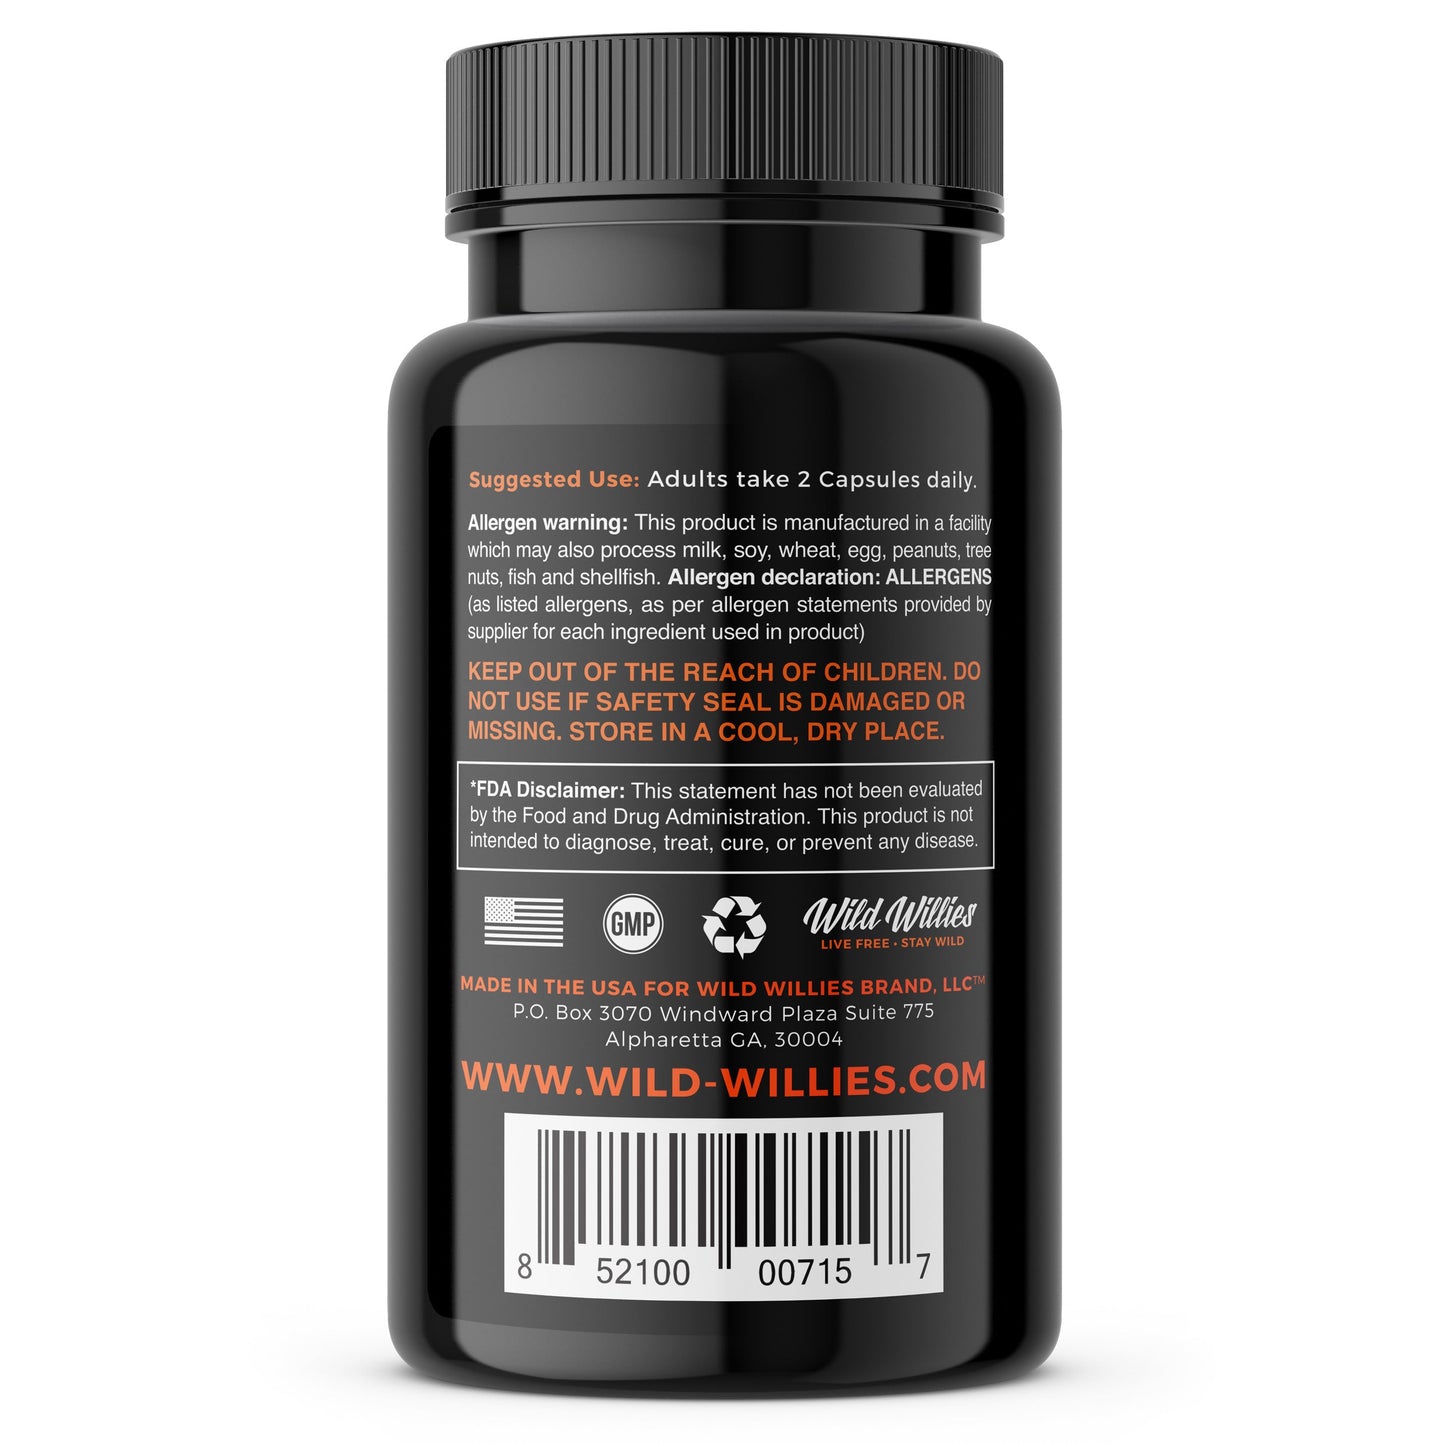 Wild-Willies Beard Growth Supplement Capsules - Back